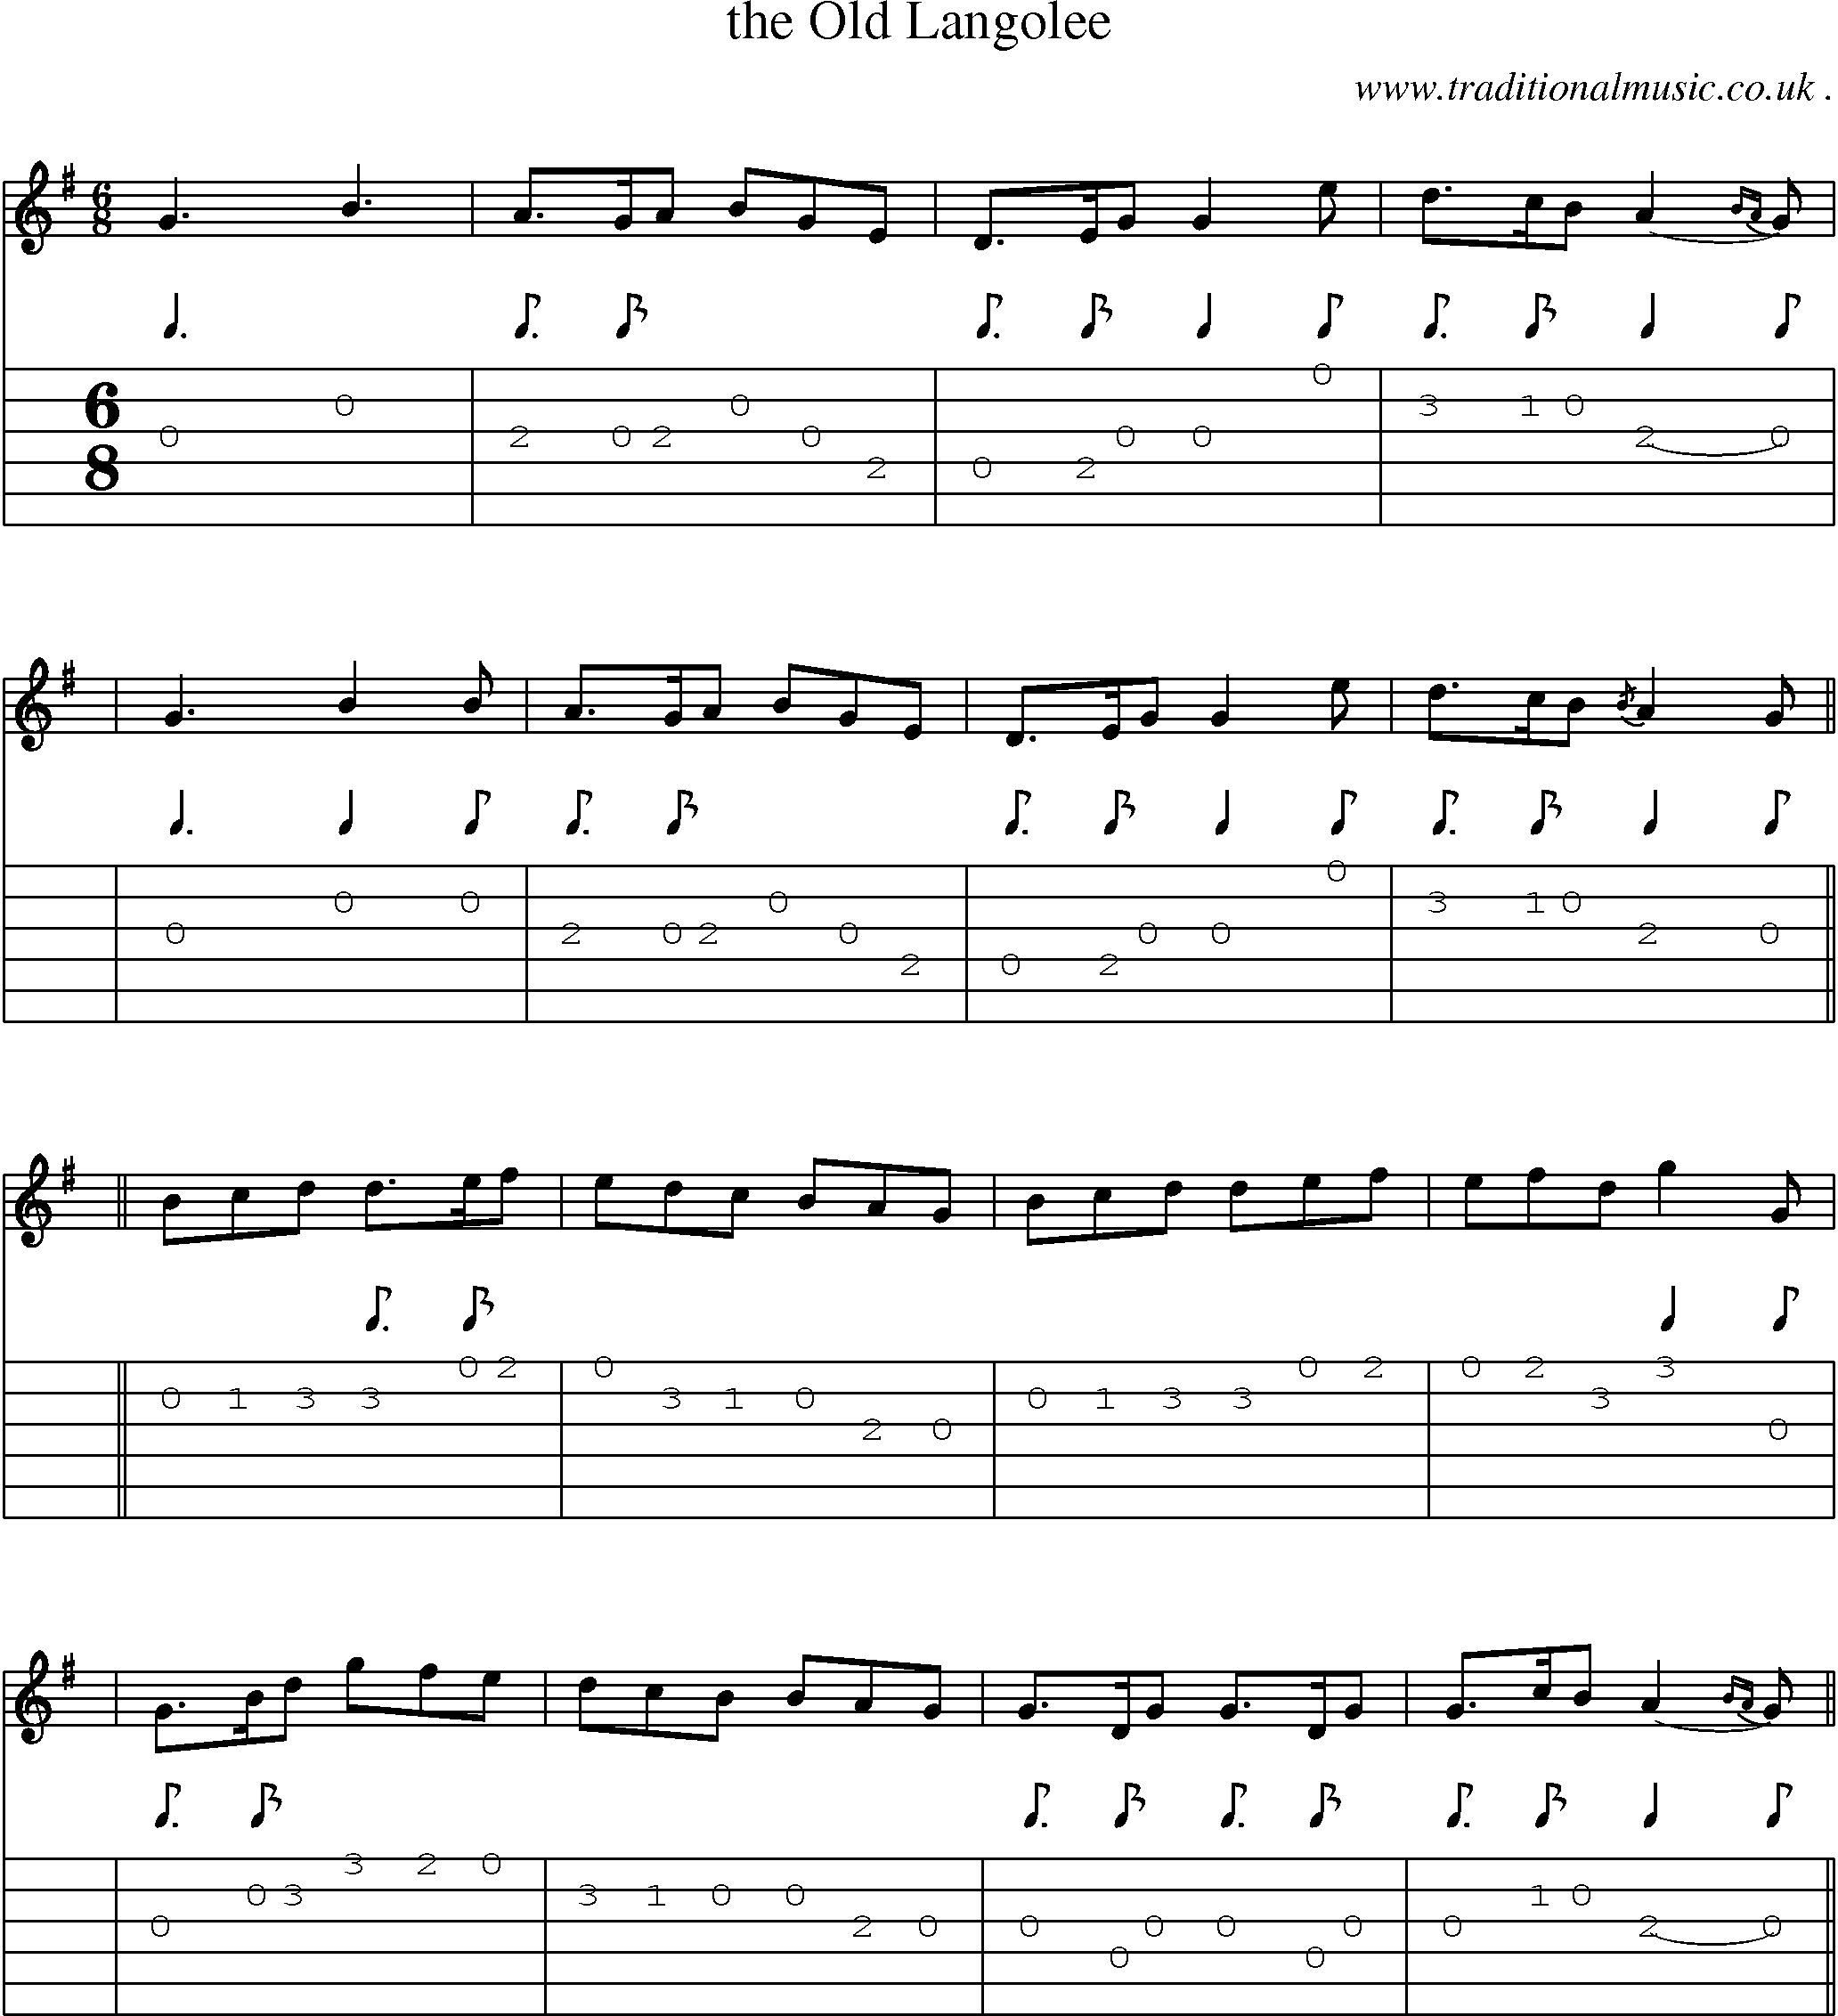 Sheet-music  score, Chords and Guitar Tabs for The Old Langolee